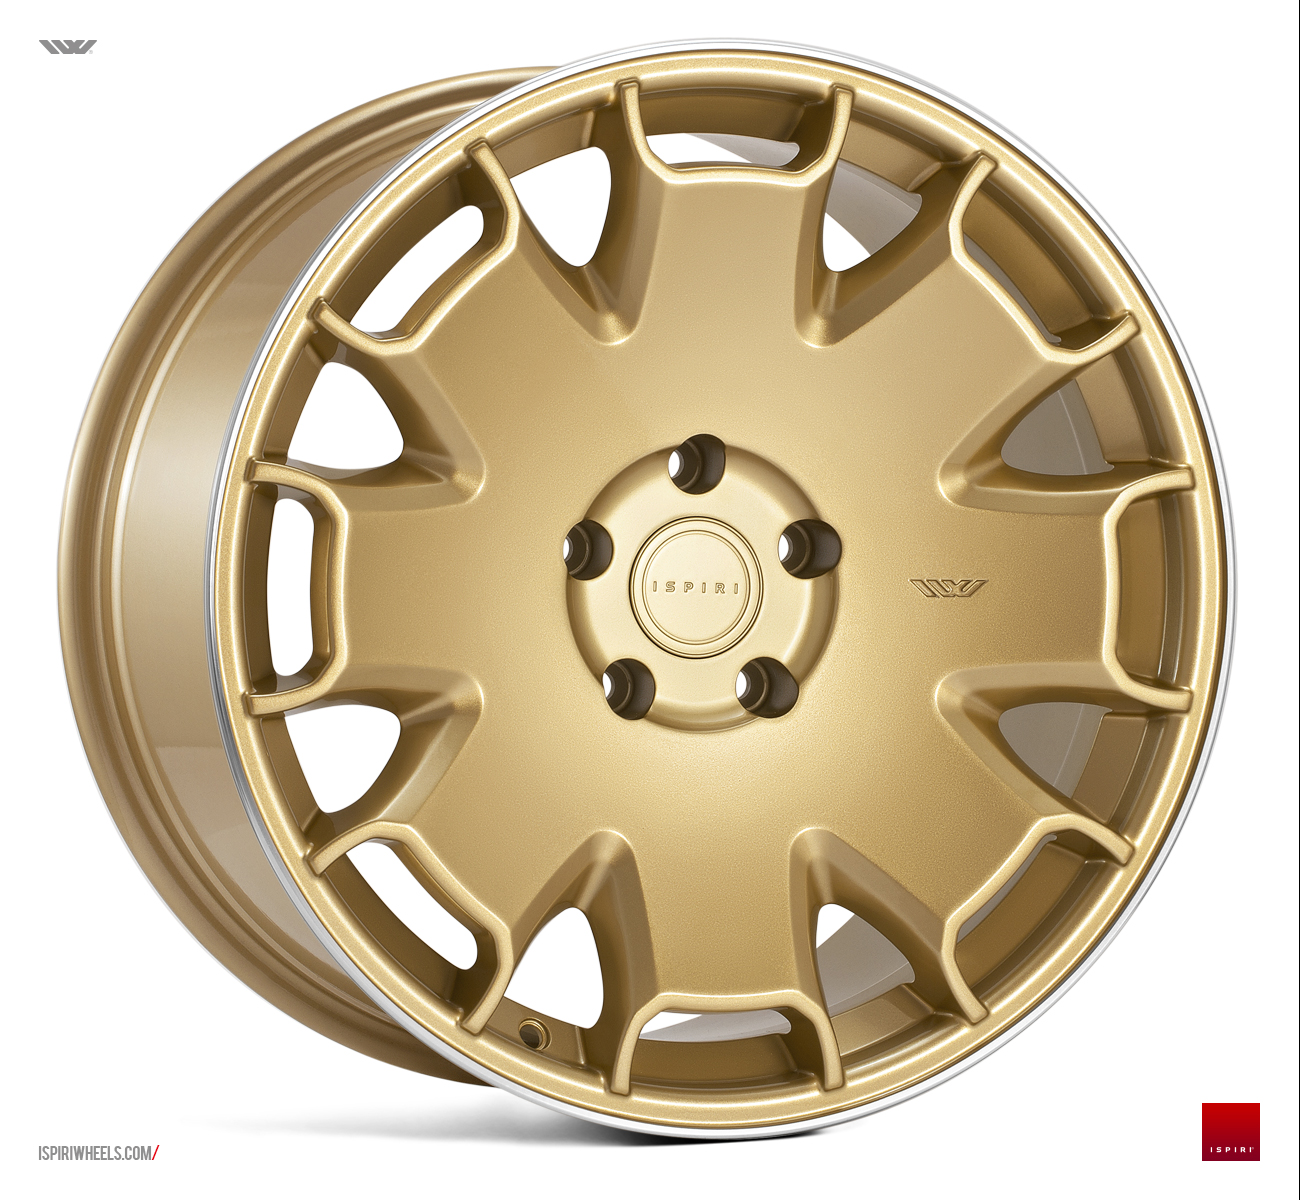 NEW 19  ISPIRI CSR2 ALLOY WHEELS IN VINTAGE GOLD WITH POLISHED LIP et32 or et42 42